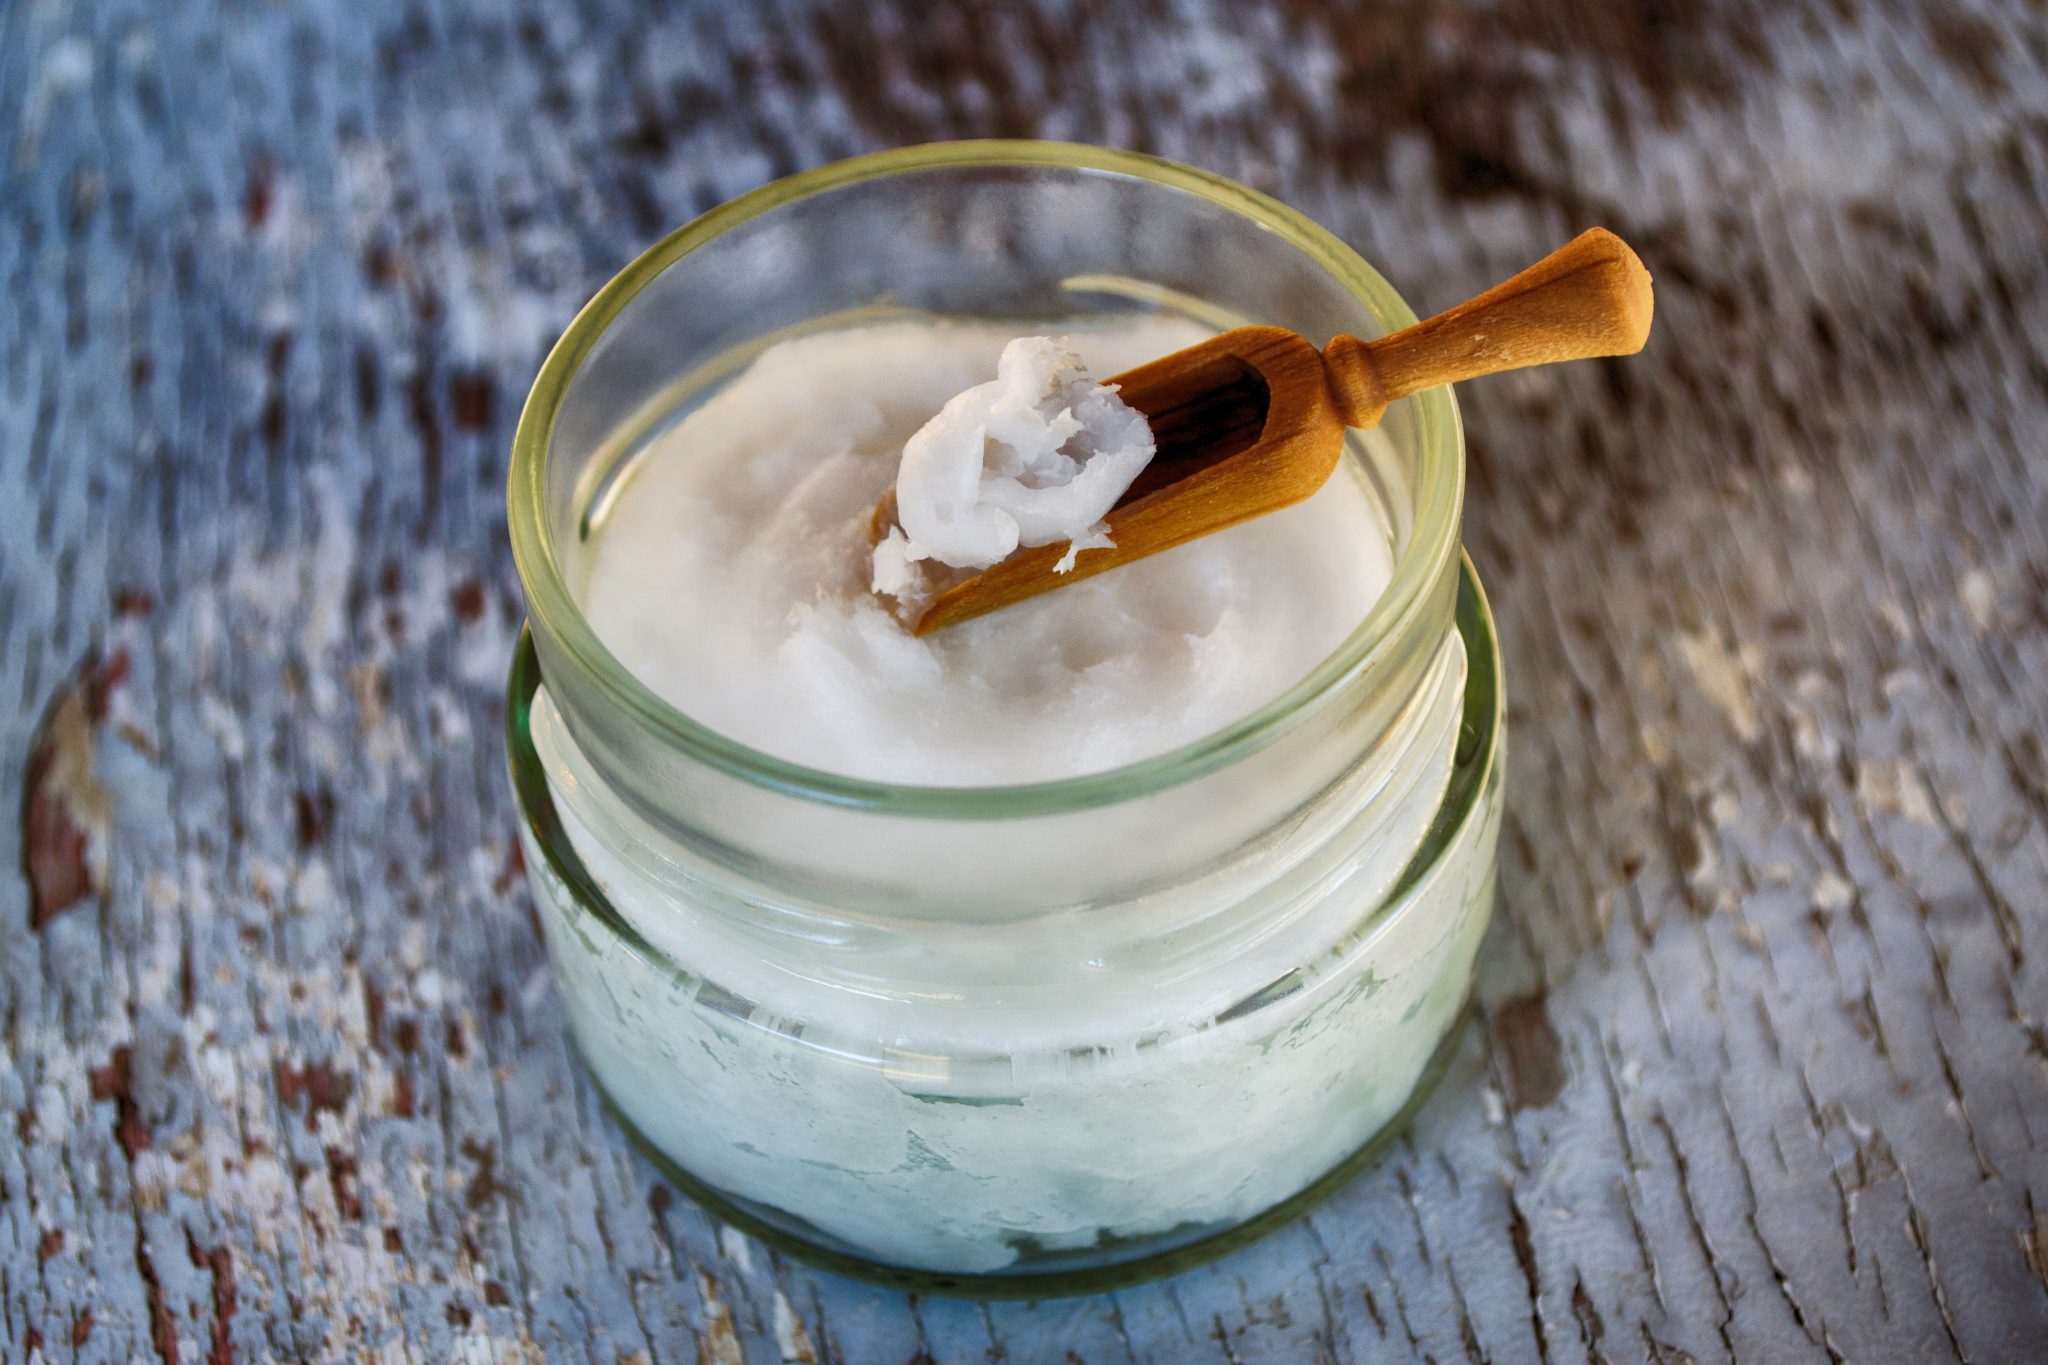  Coconut oil plays an important rule when it comes to moisturizing.